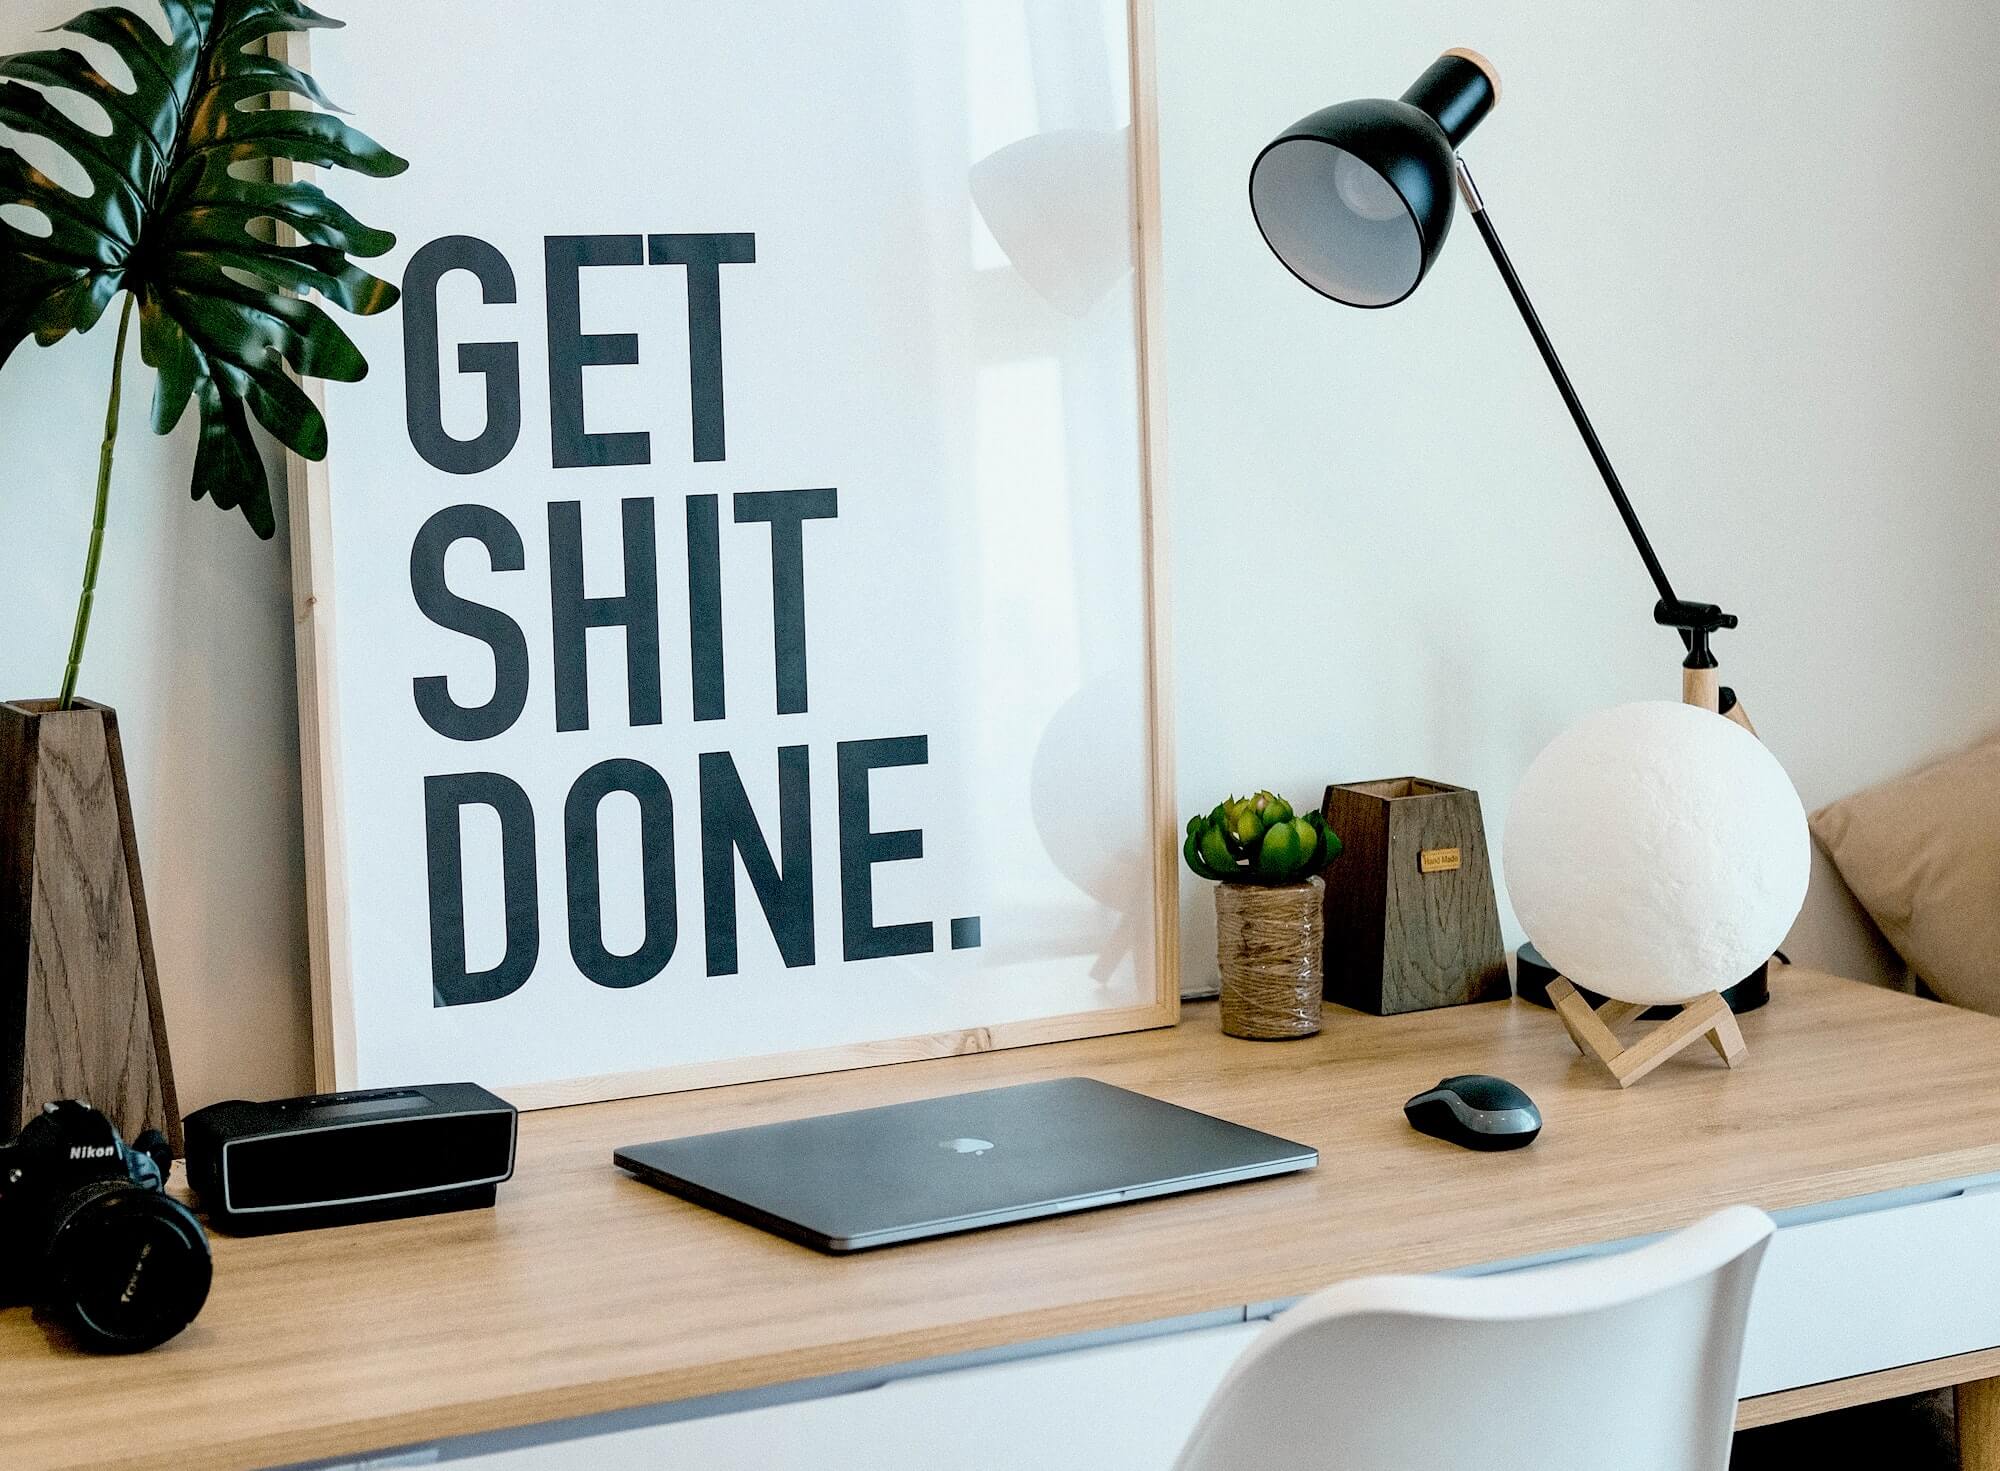 Basic first tips for starting to work from home